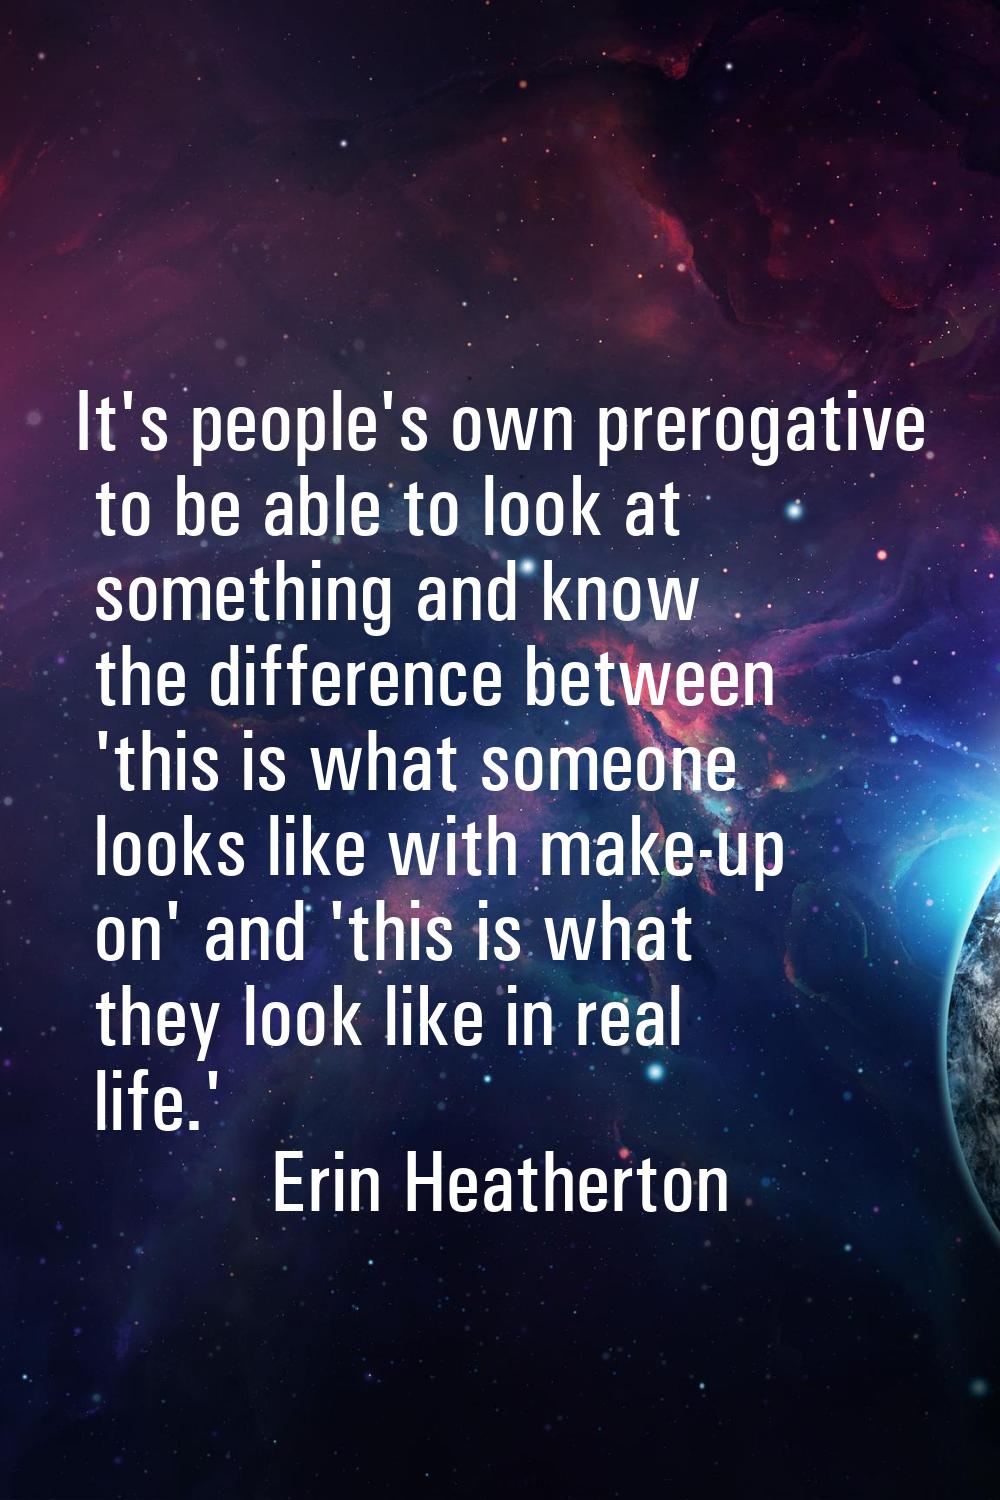 It's people's own prerogative to be able to look at something and know the difference between 'this